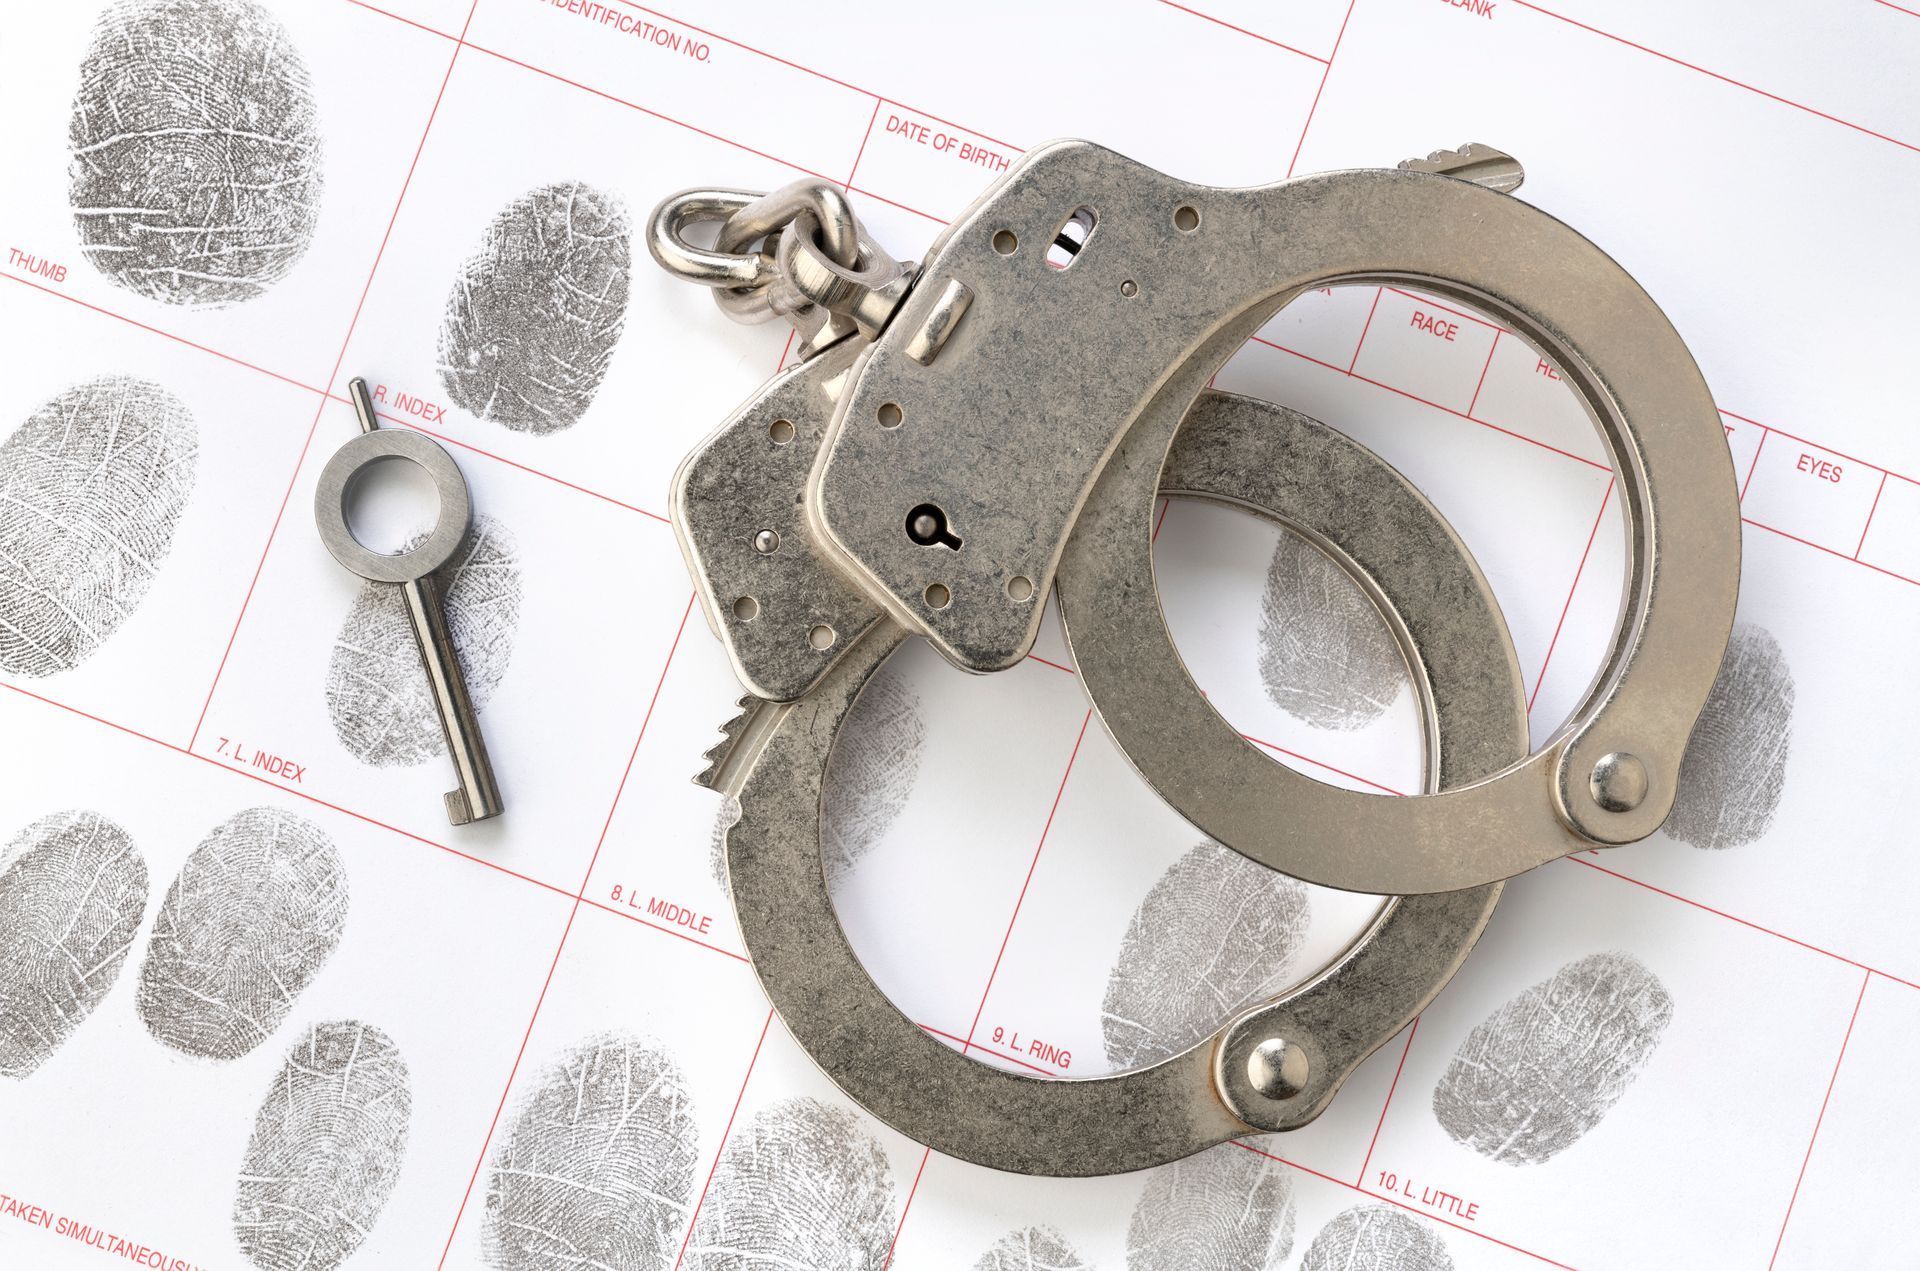 A pair of handcuffs and a key on top of a sheet of fingerprints